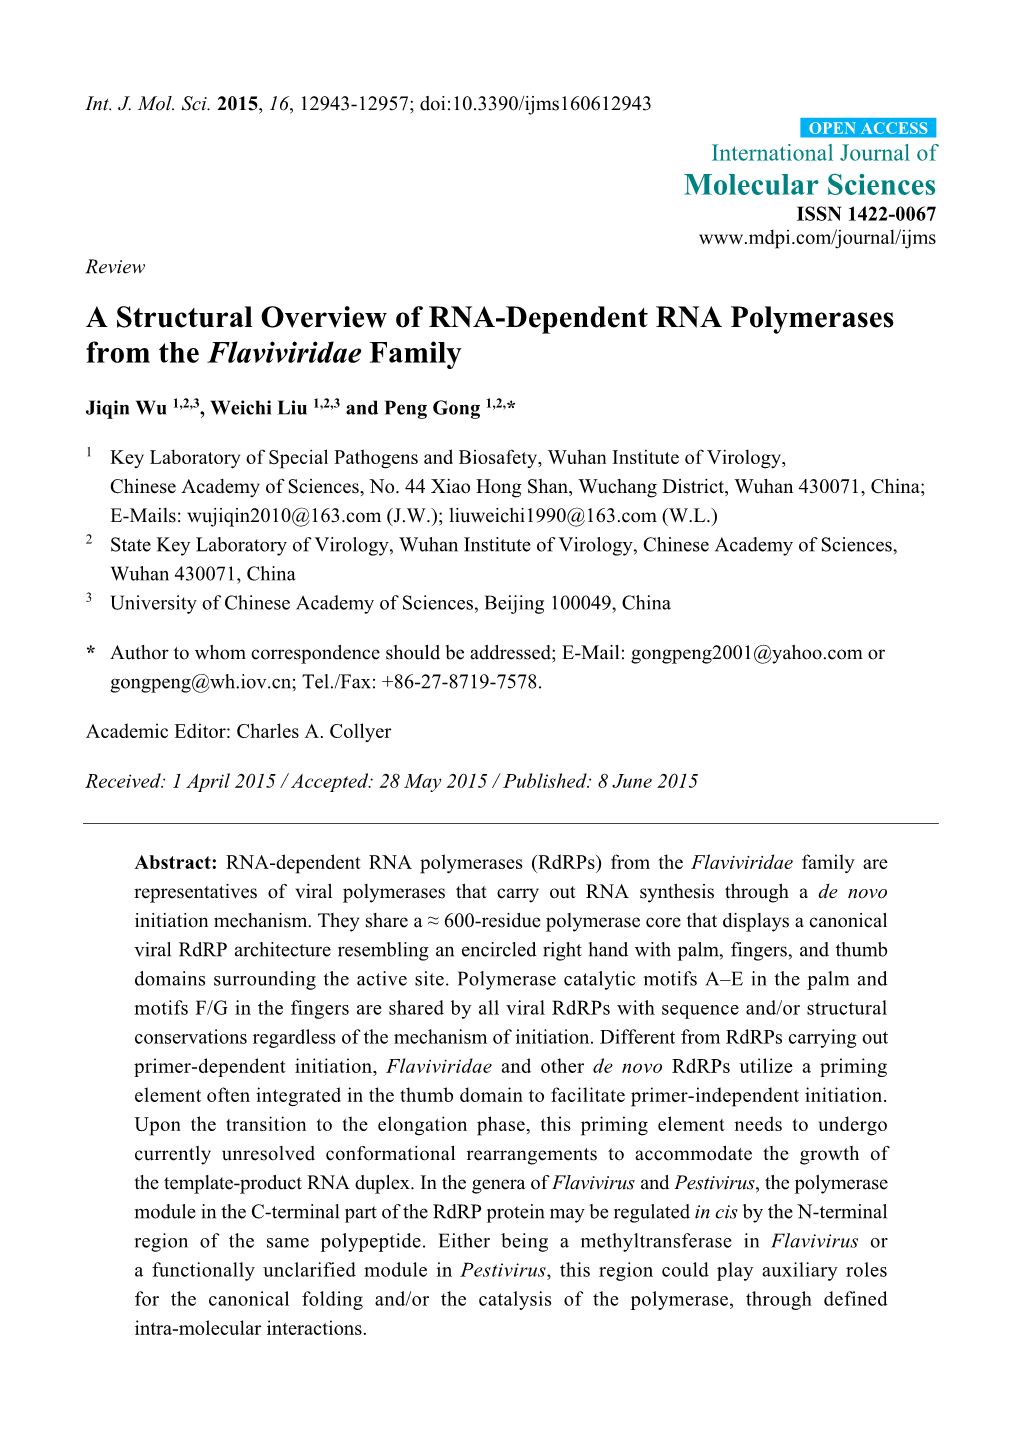 A Structural Overview of RNA-Dependent RNA Polymerases from the Flaviviridae Family